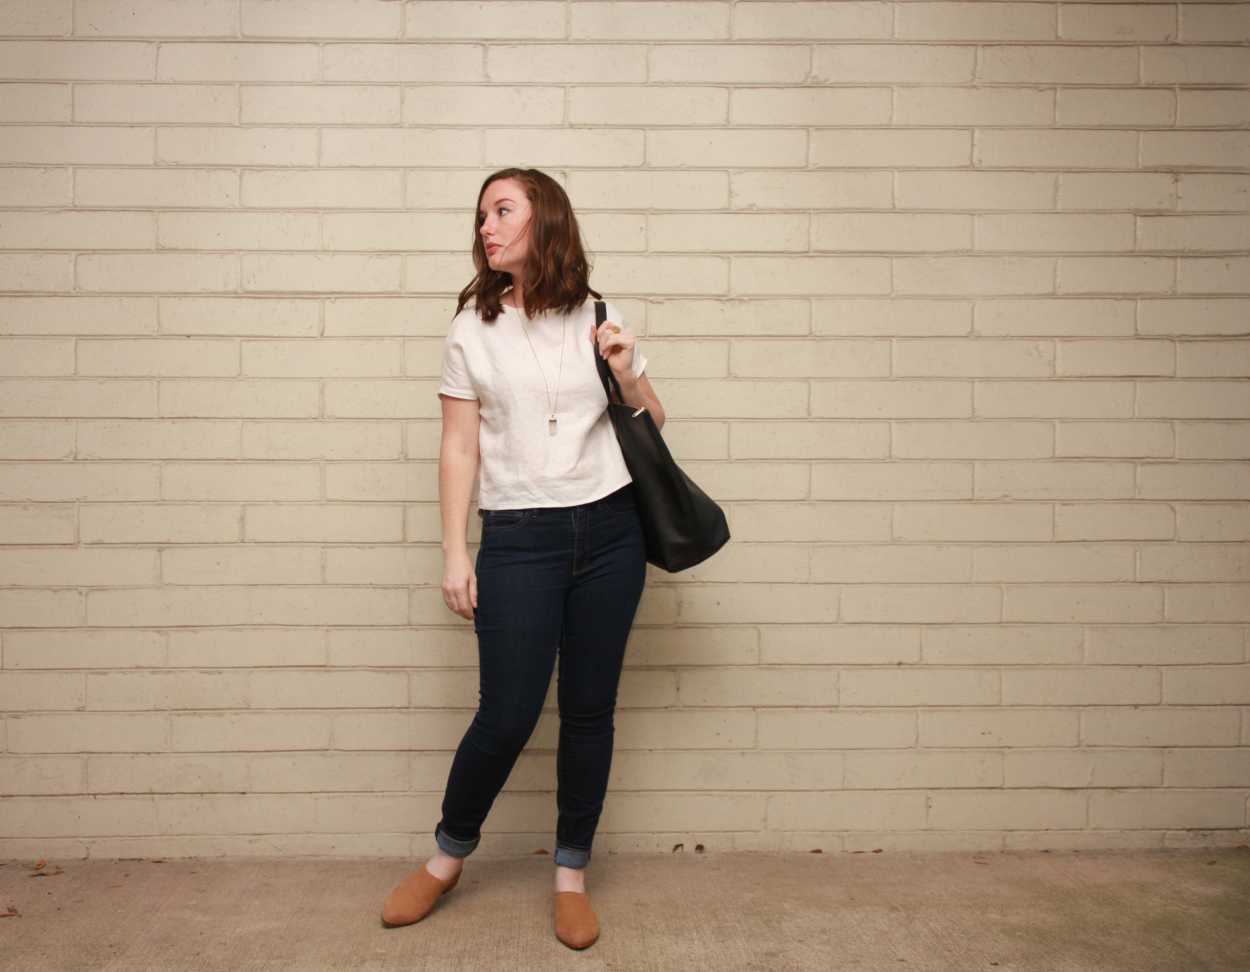 Alyssa wears a homemade white linen tee, skinny blue jeans, and nude mules and carries a tote bag